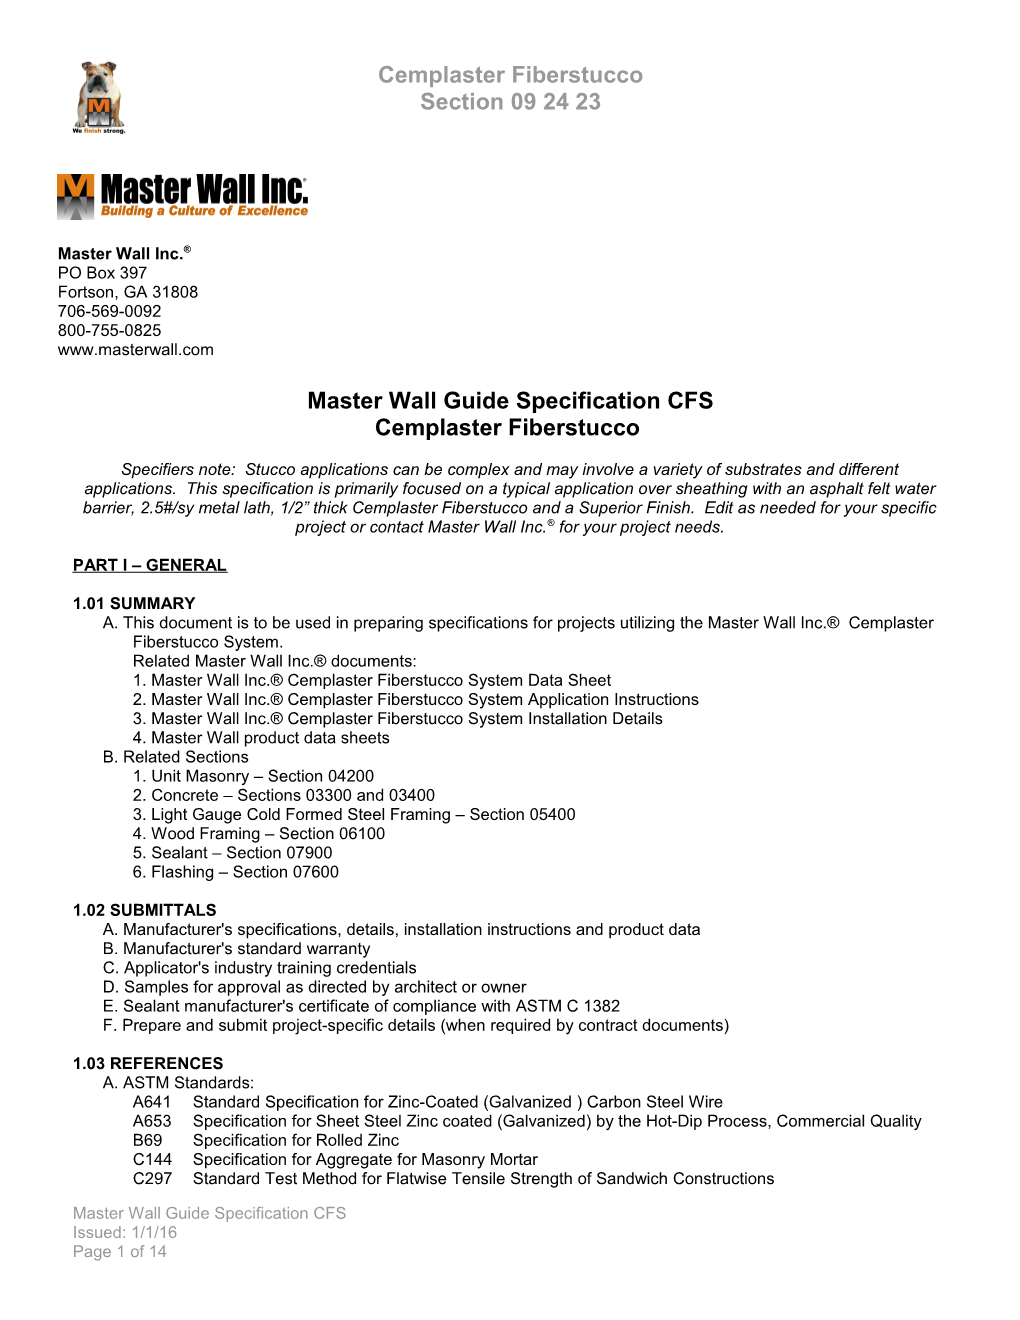 Master Wall Guide Specification CFS